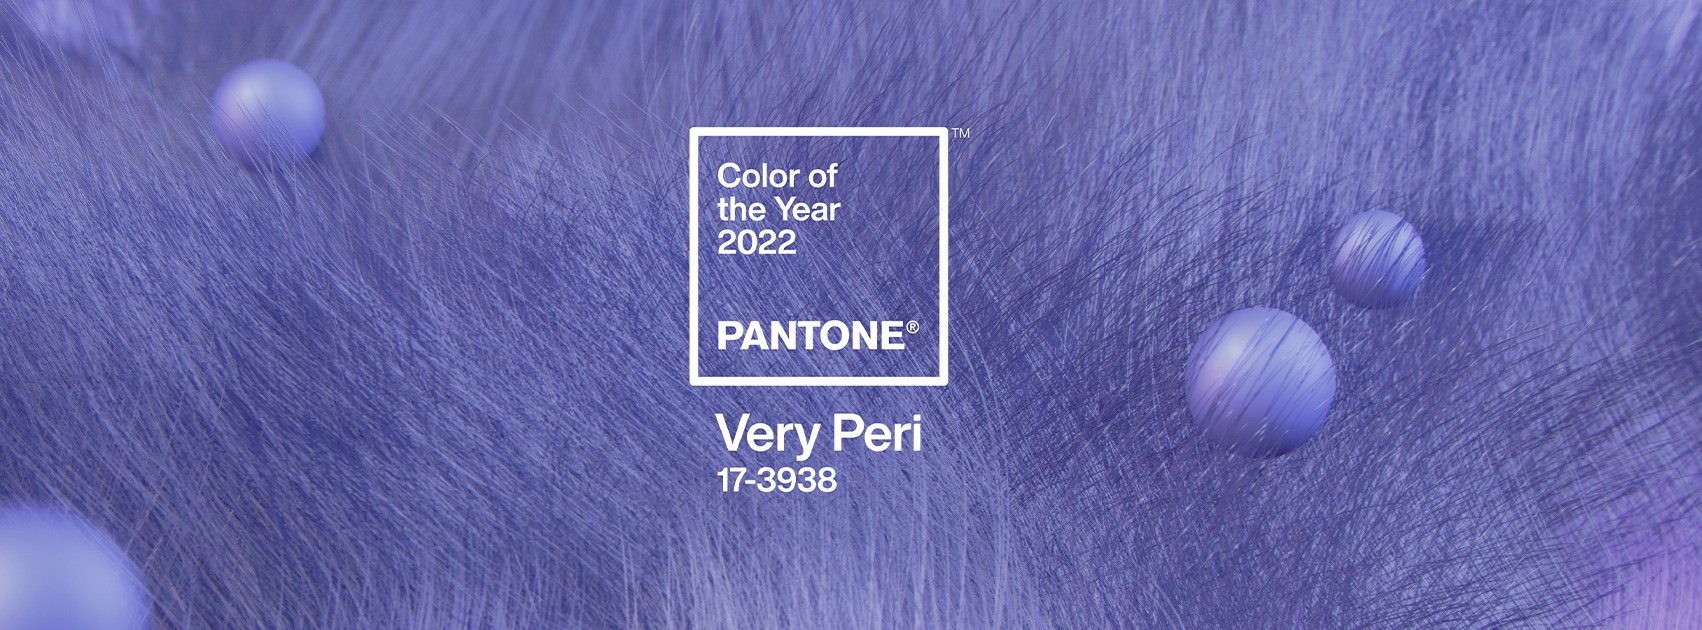 Very Pery Color of the Year